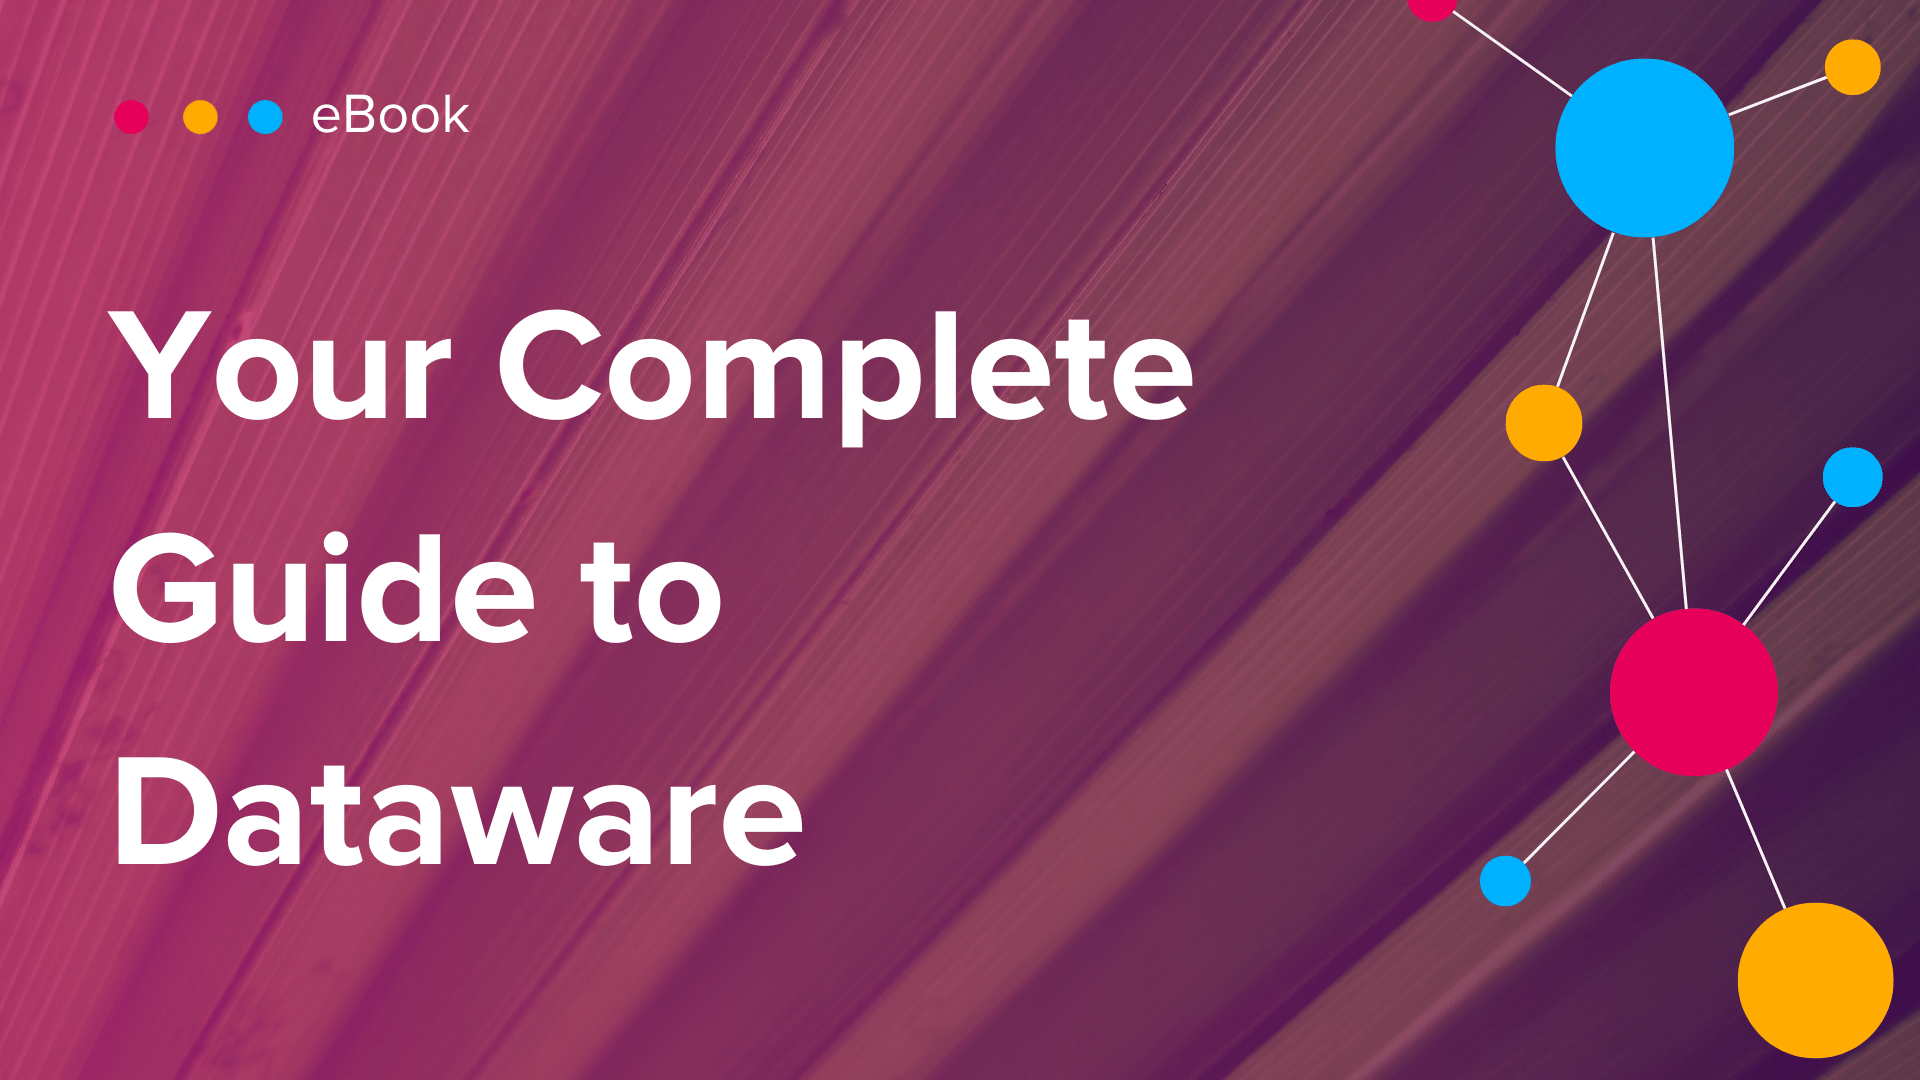 ebook- your complete guide to dataware